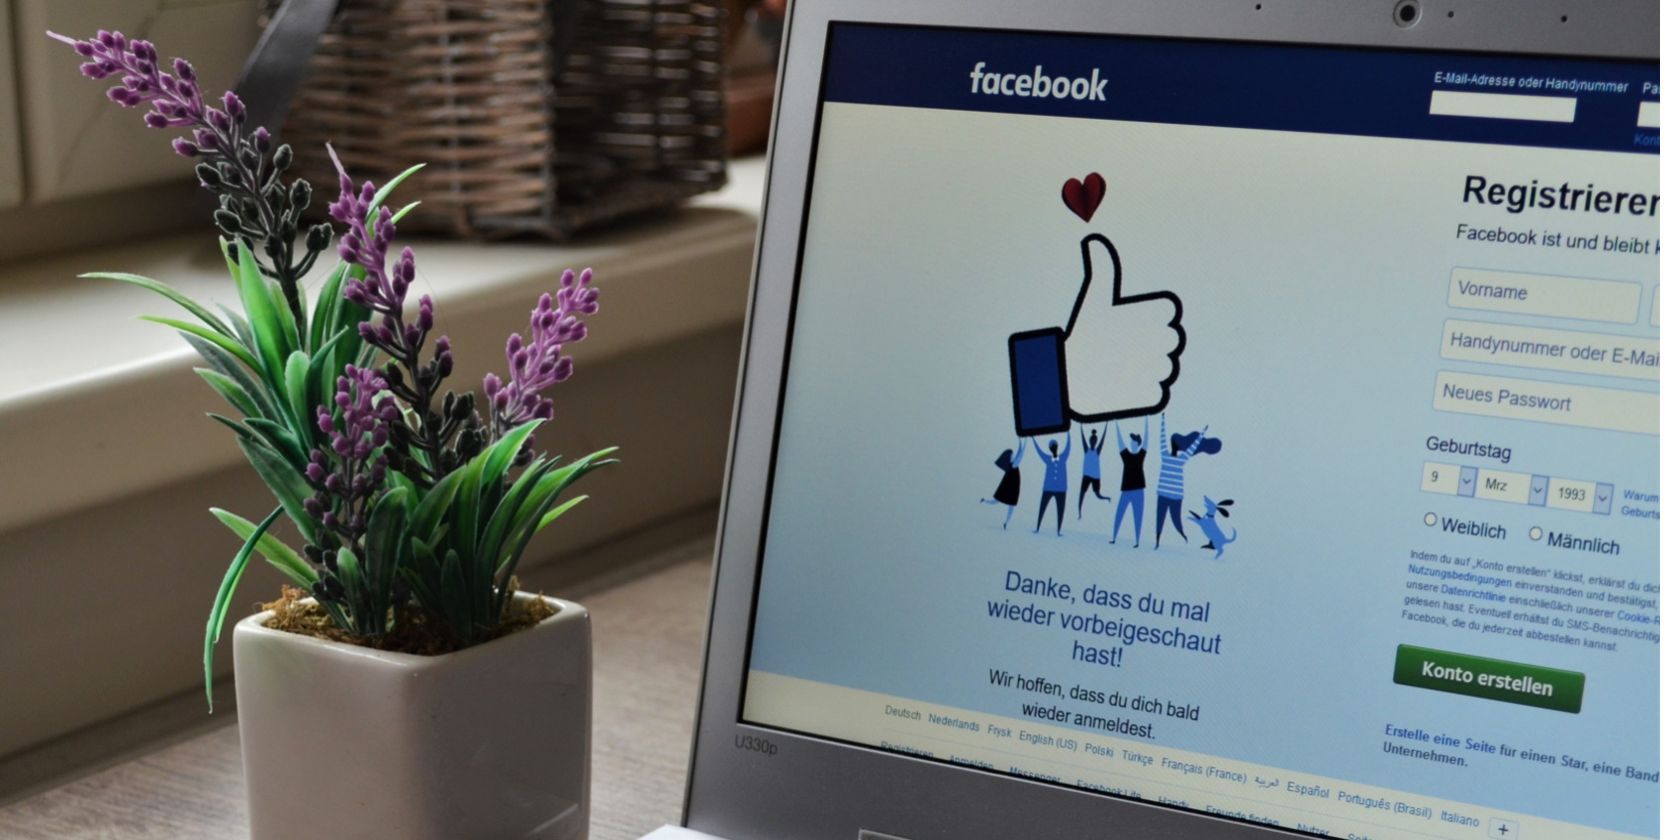 Laptop showing Facebook page